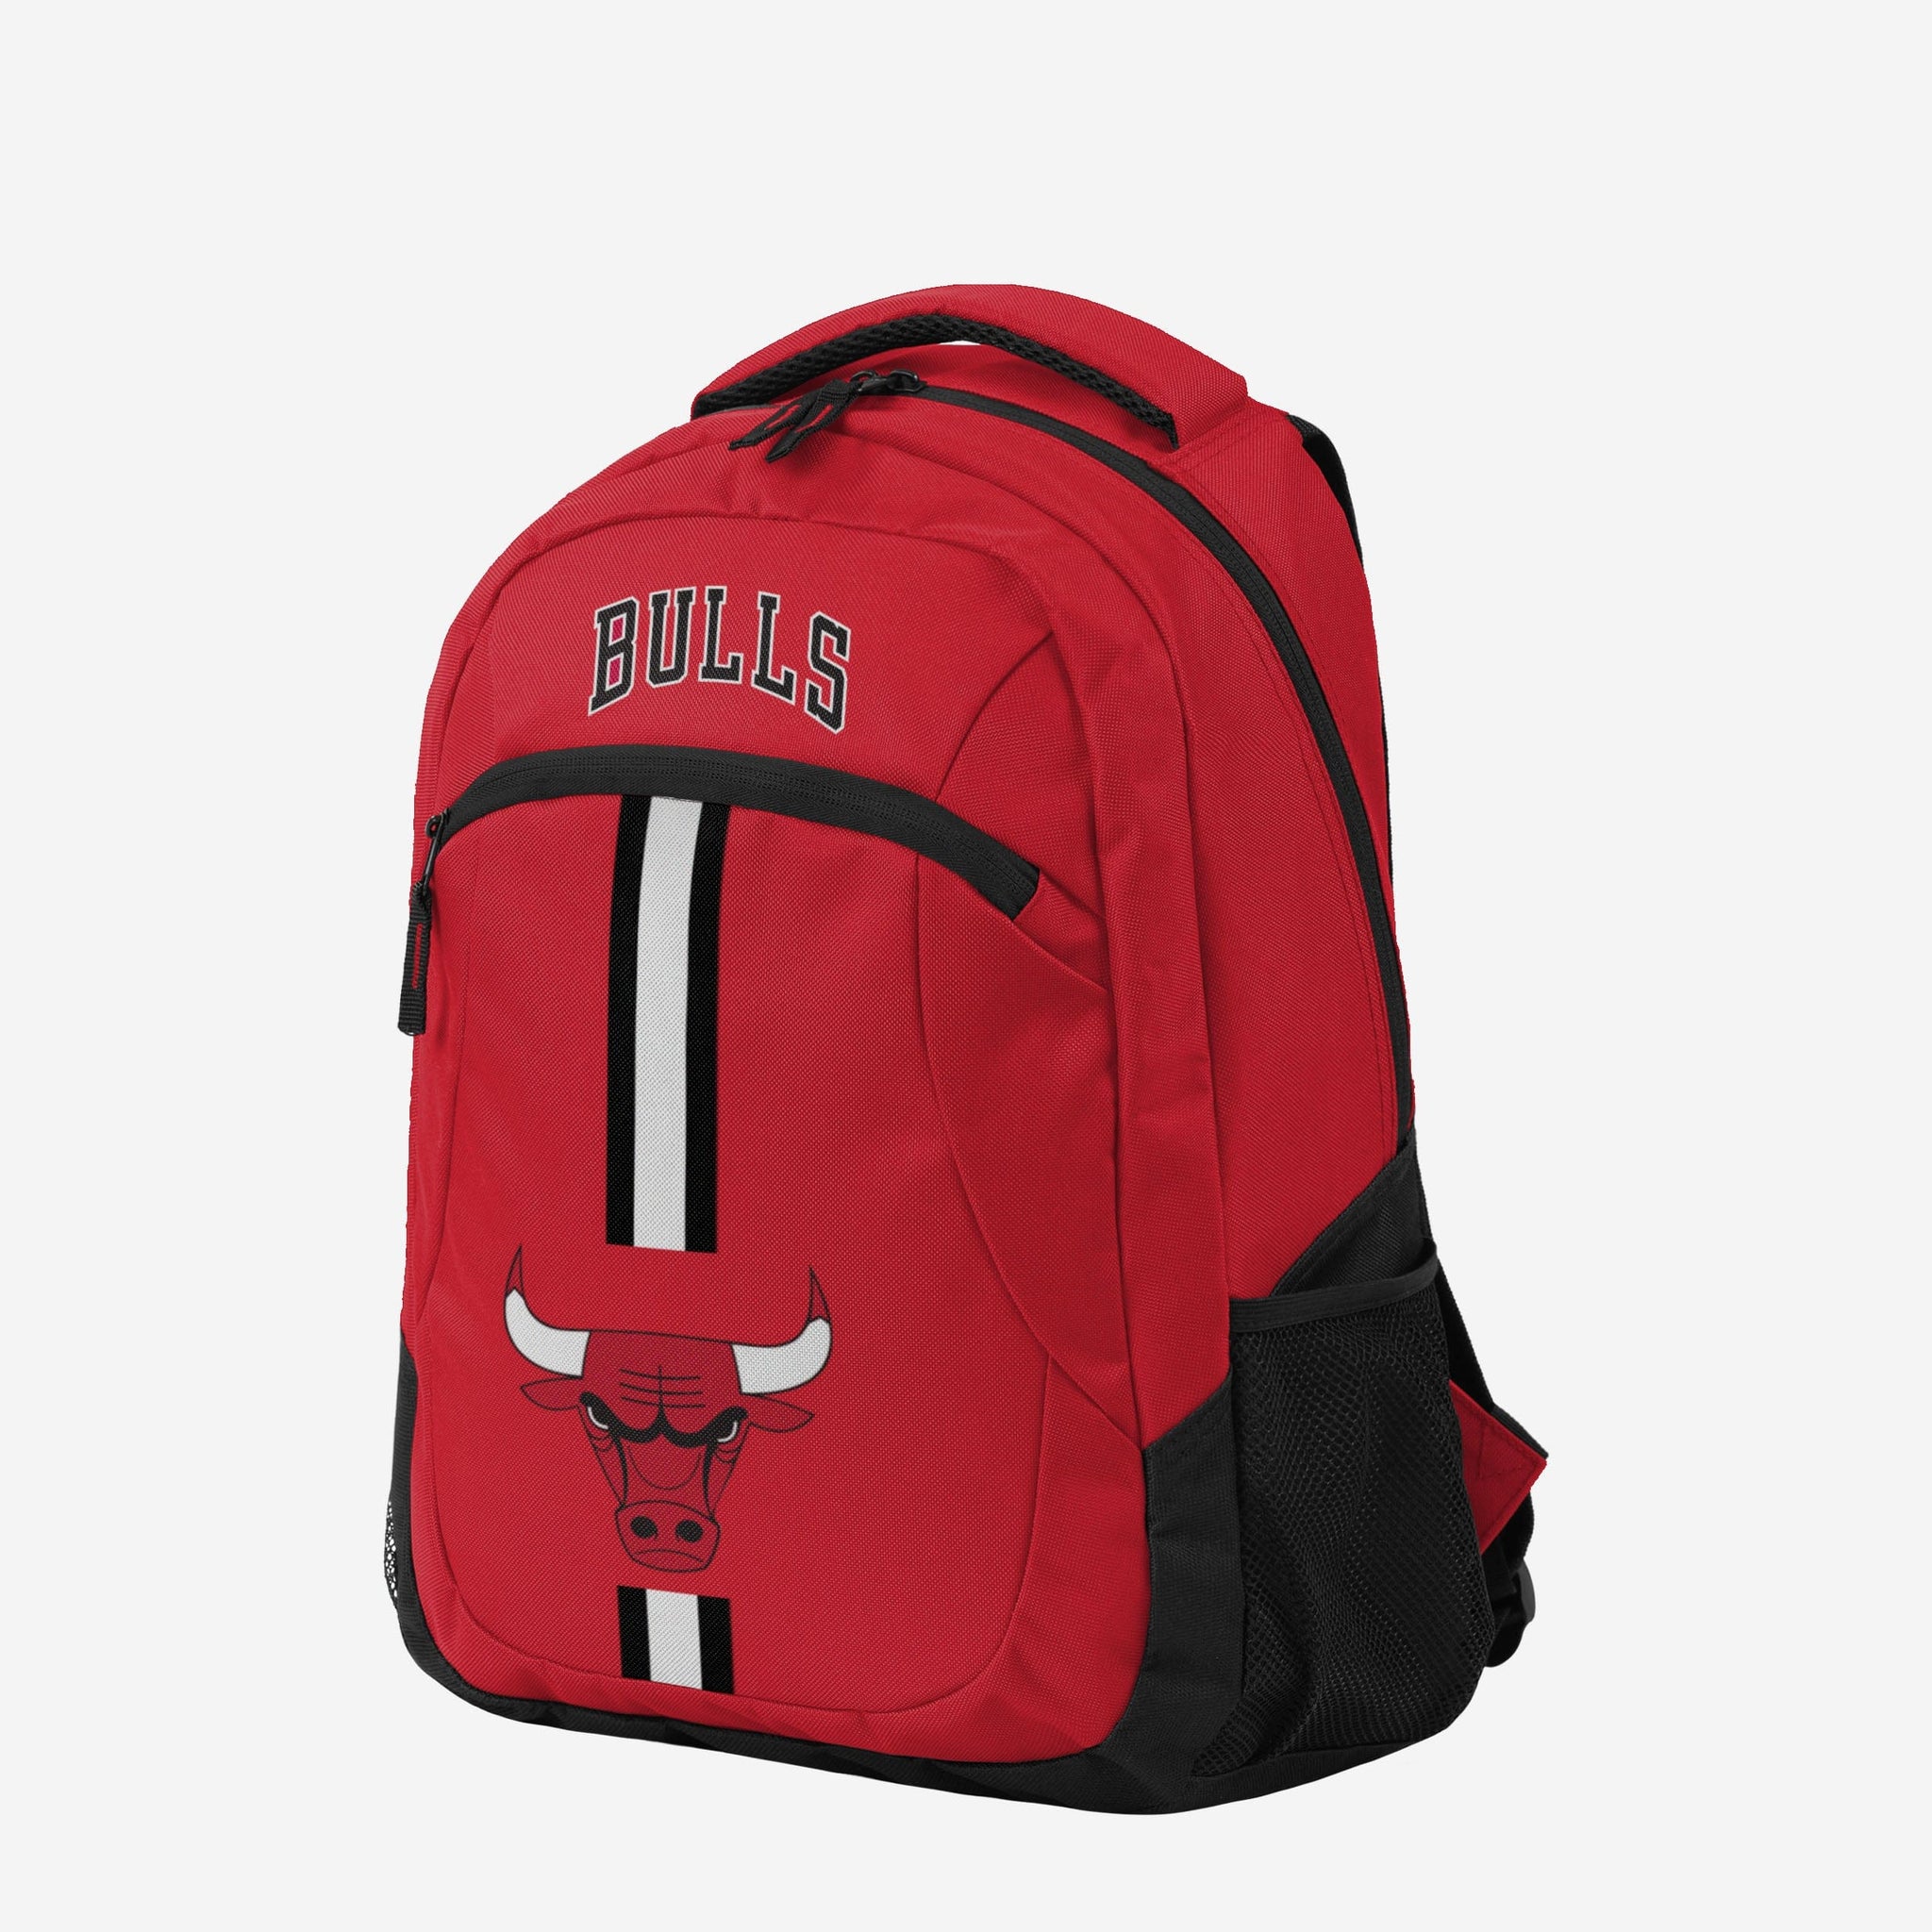 Chicago Bulls Apparel, Collectibles, and Fan Gear. FOCO